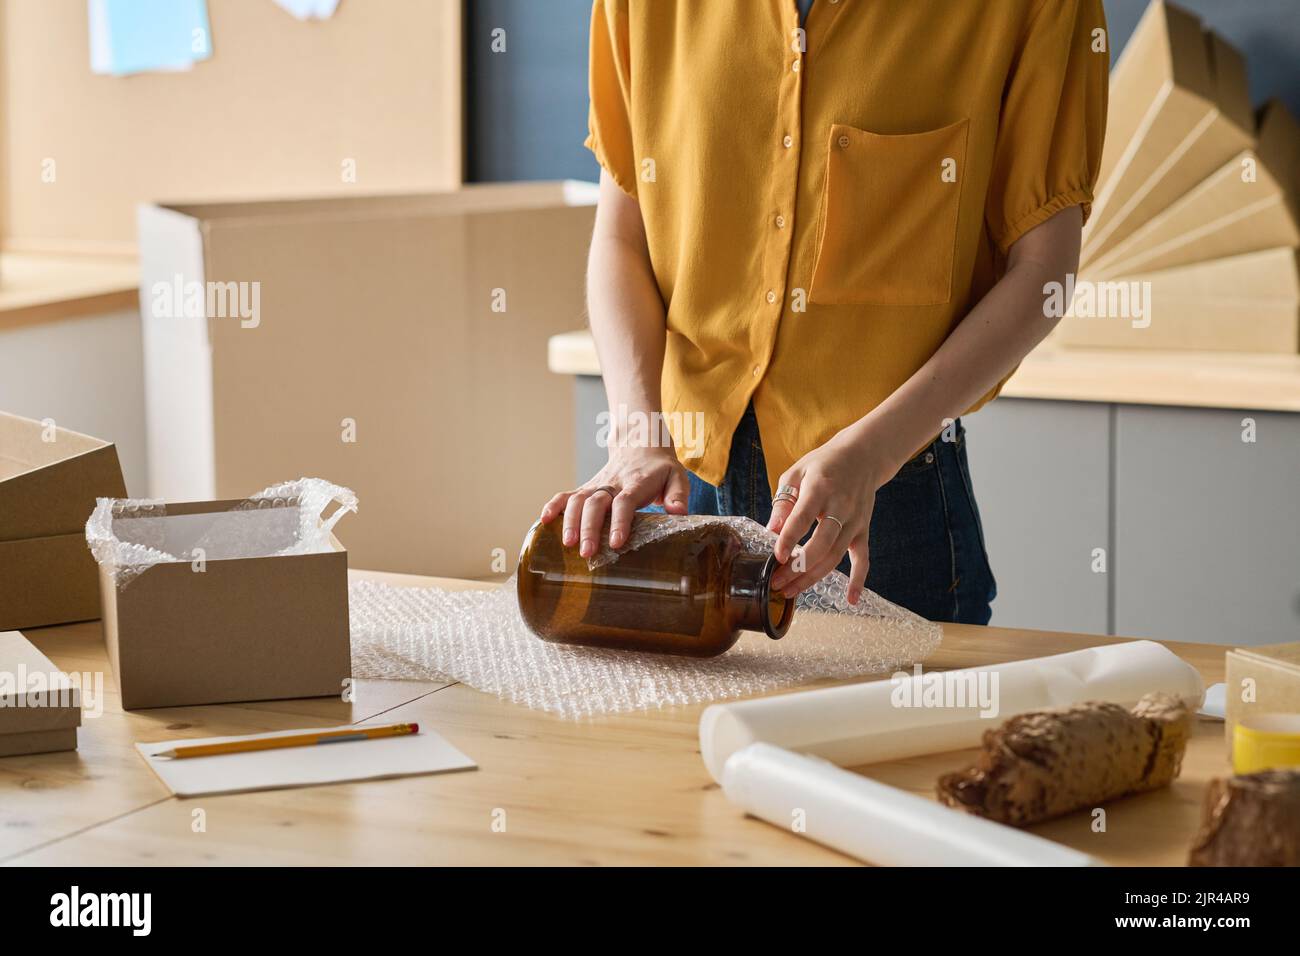 Close-up of female worker wrapping glass jar in packet to pack it in the box for delivery Stock Photo